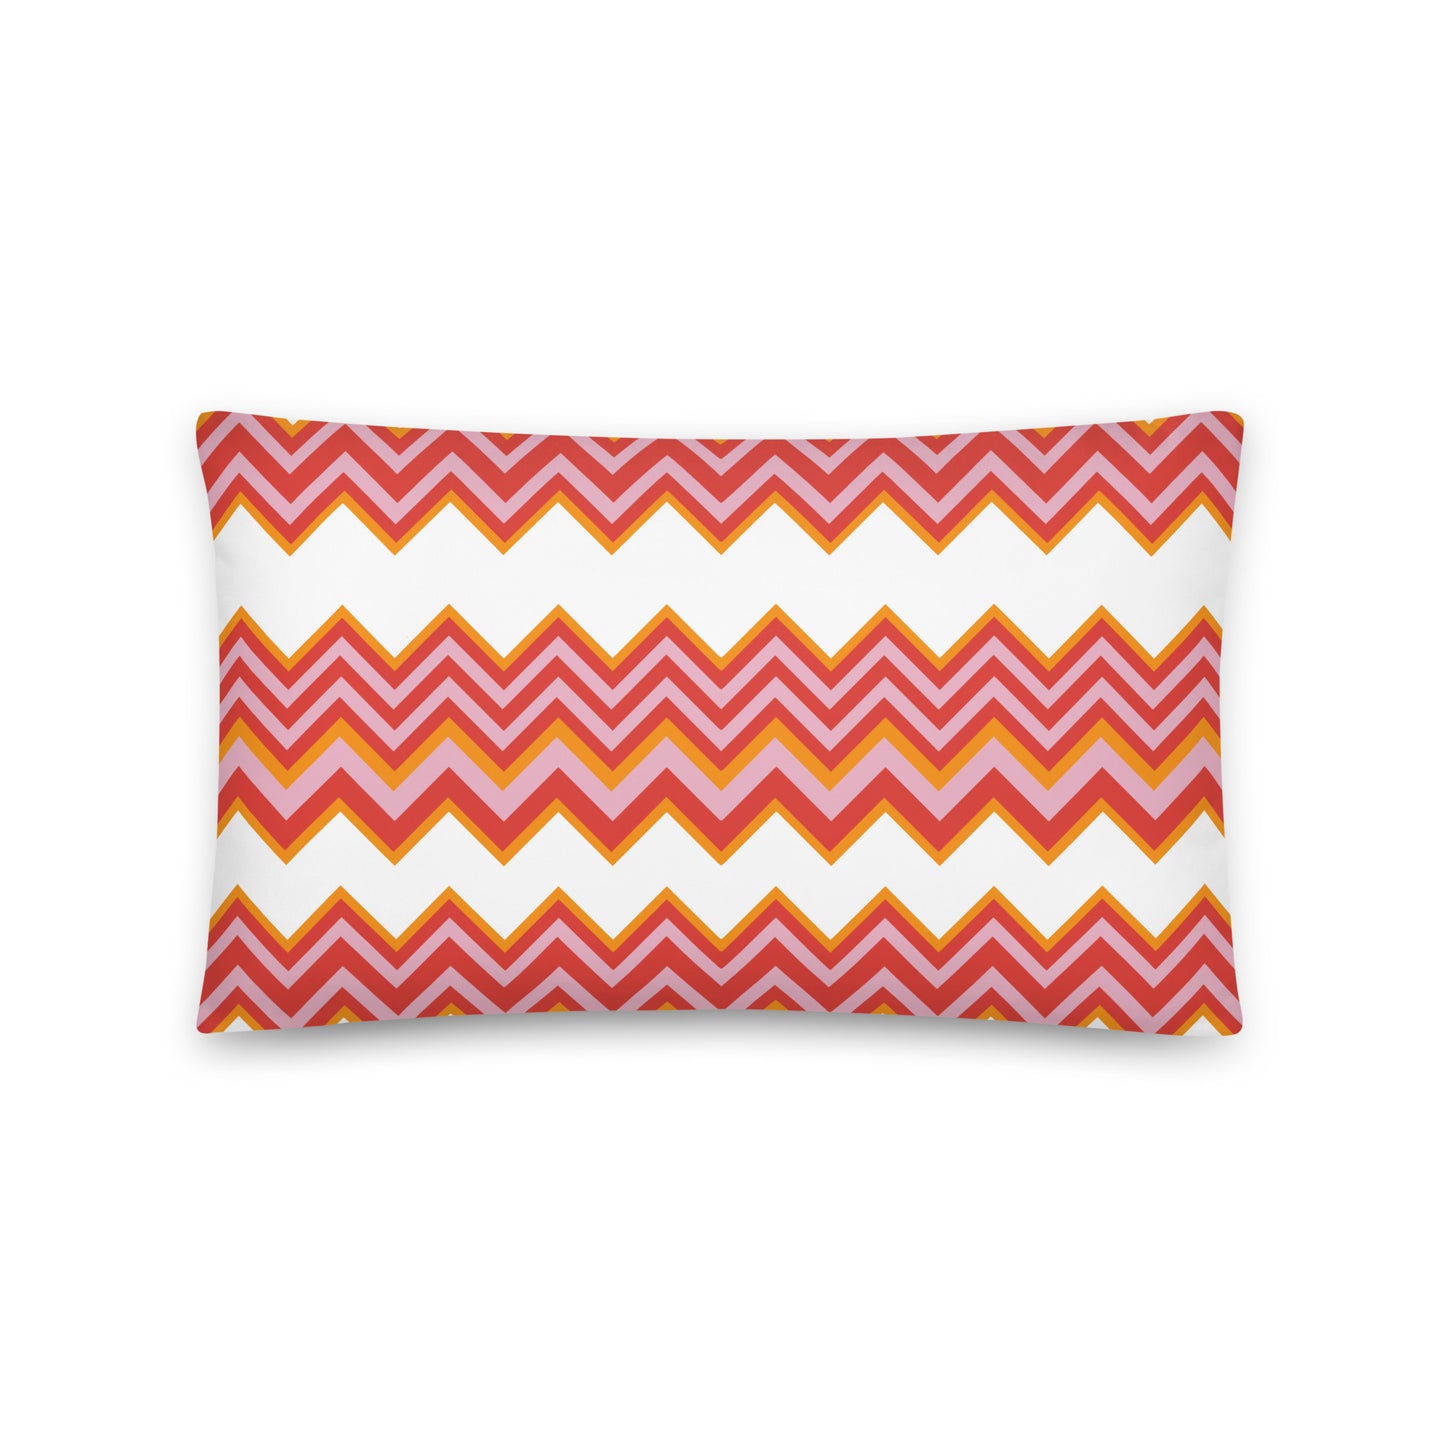 Retro Zigzag - Inspired By Taylor Swift - Sustainably Made Basic Pillow